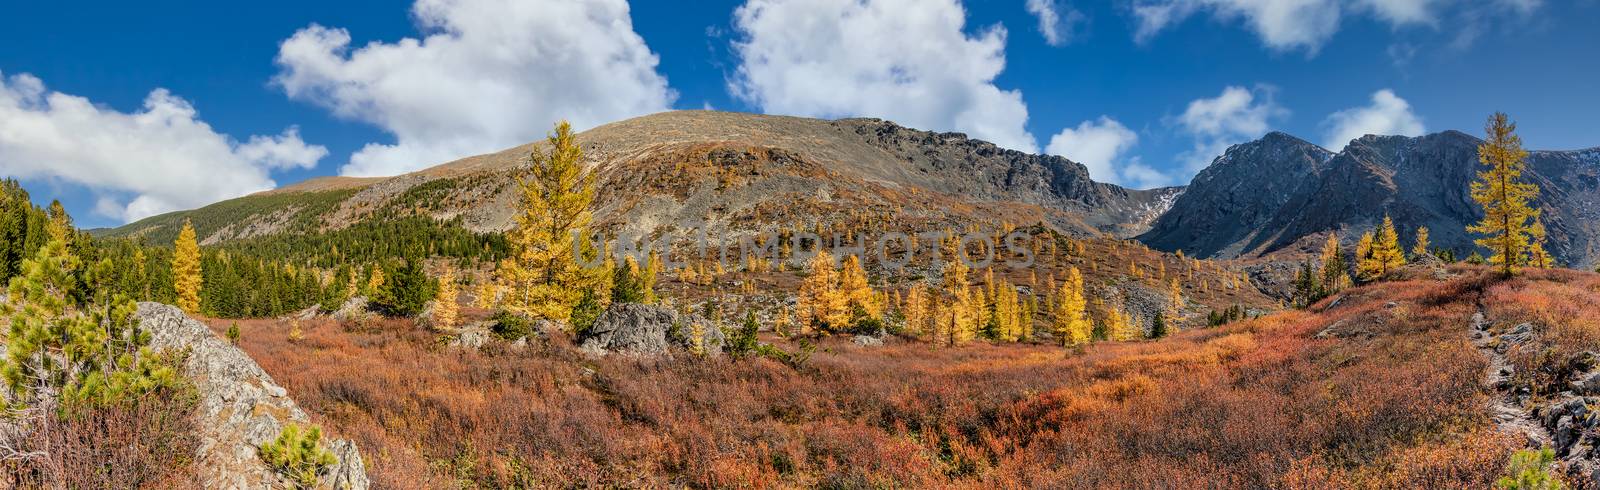 Altai mountains. Beautiful highland autumn panoramic landscape. Rocky foreground with golden trees. Blue cloudy sky as a background. Russia. Siberia.